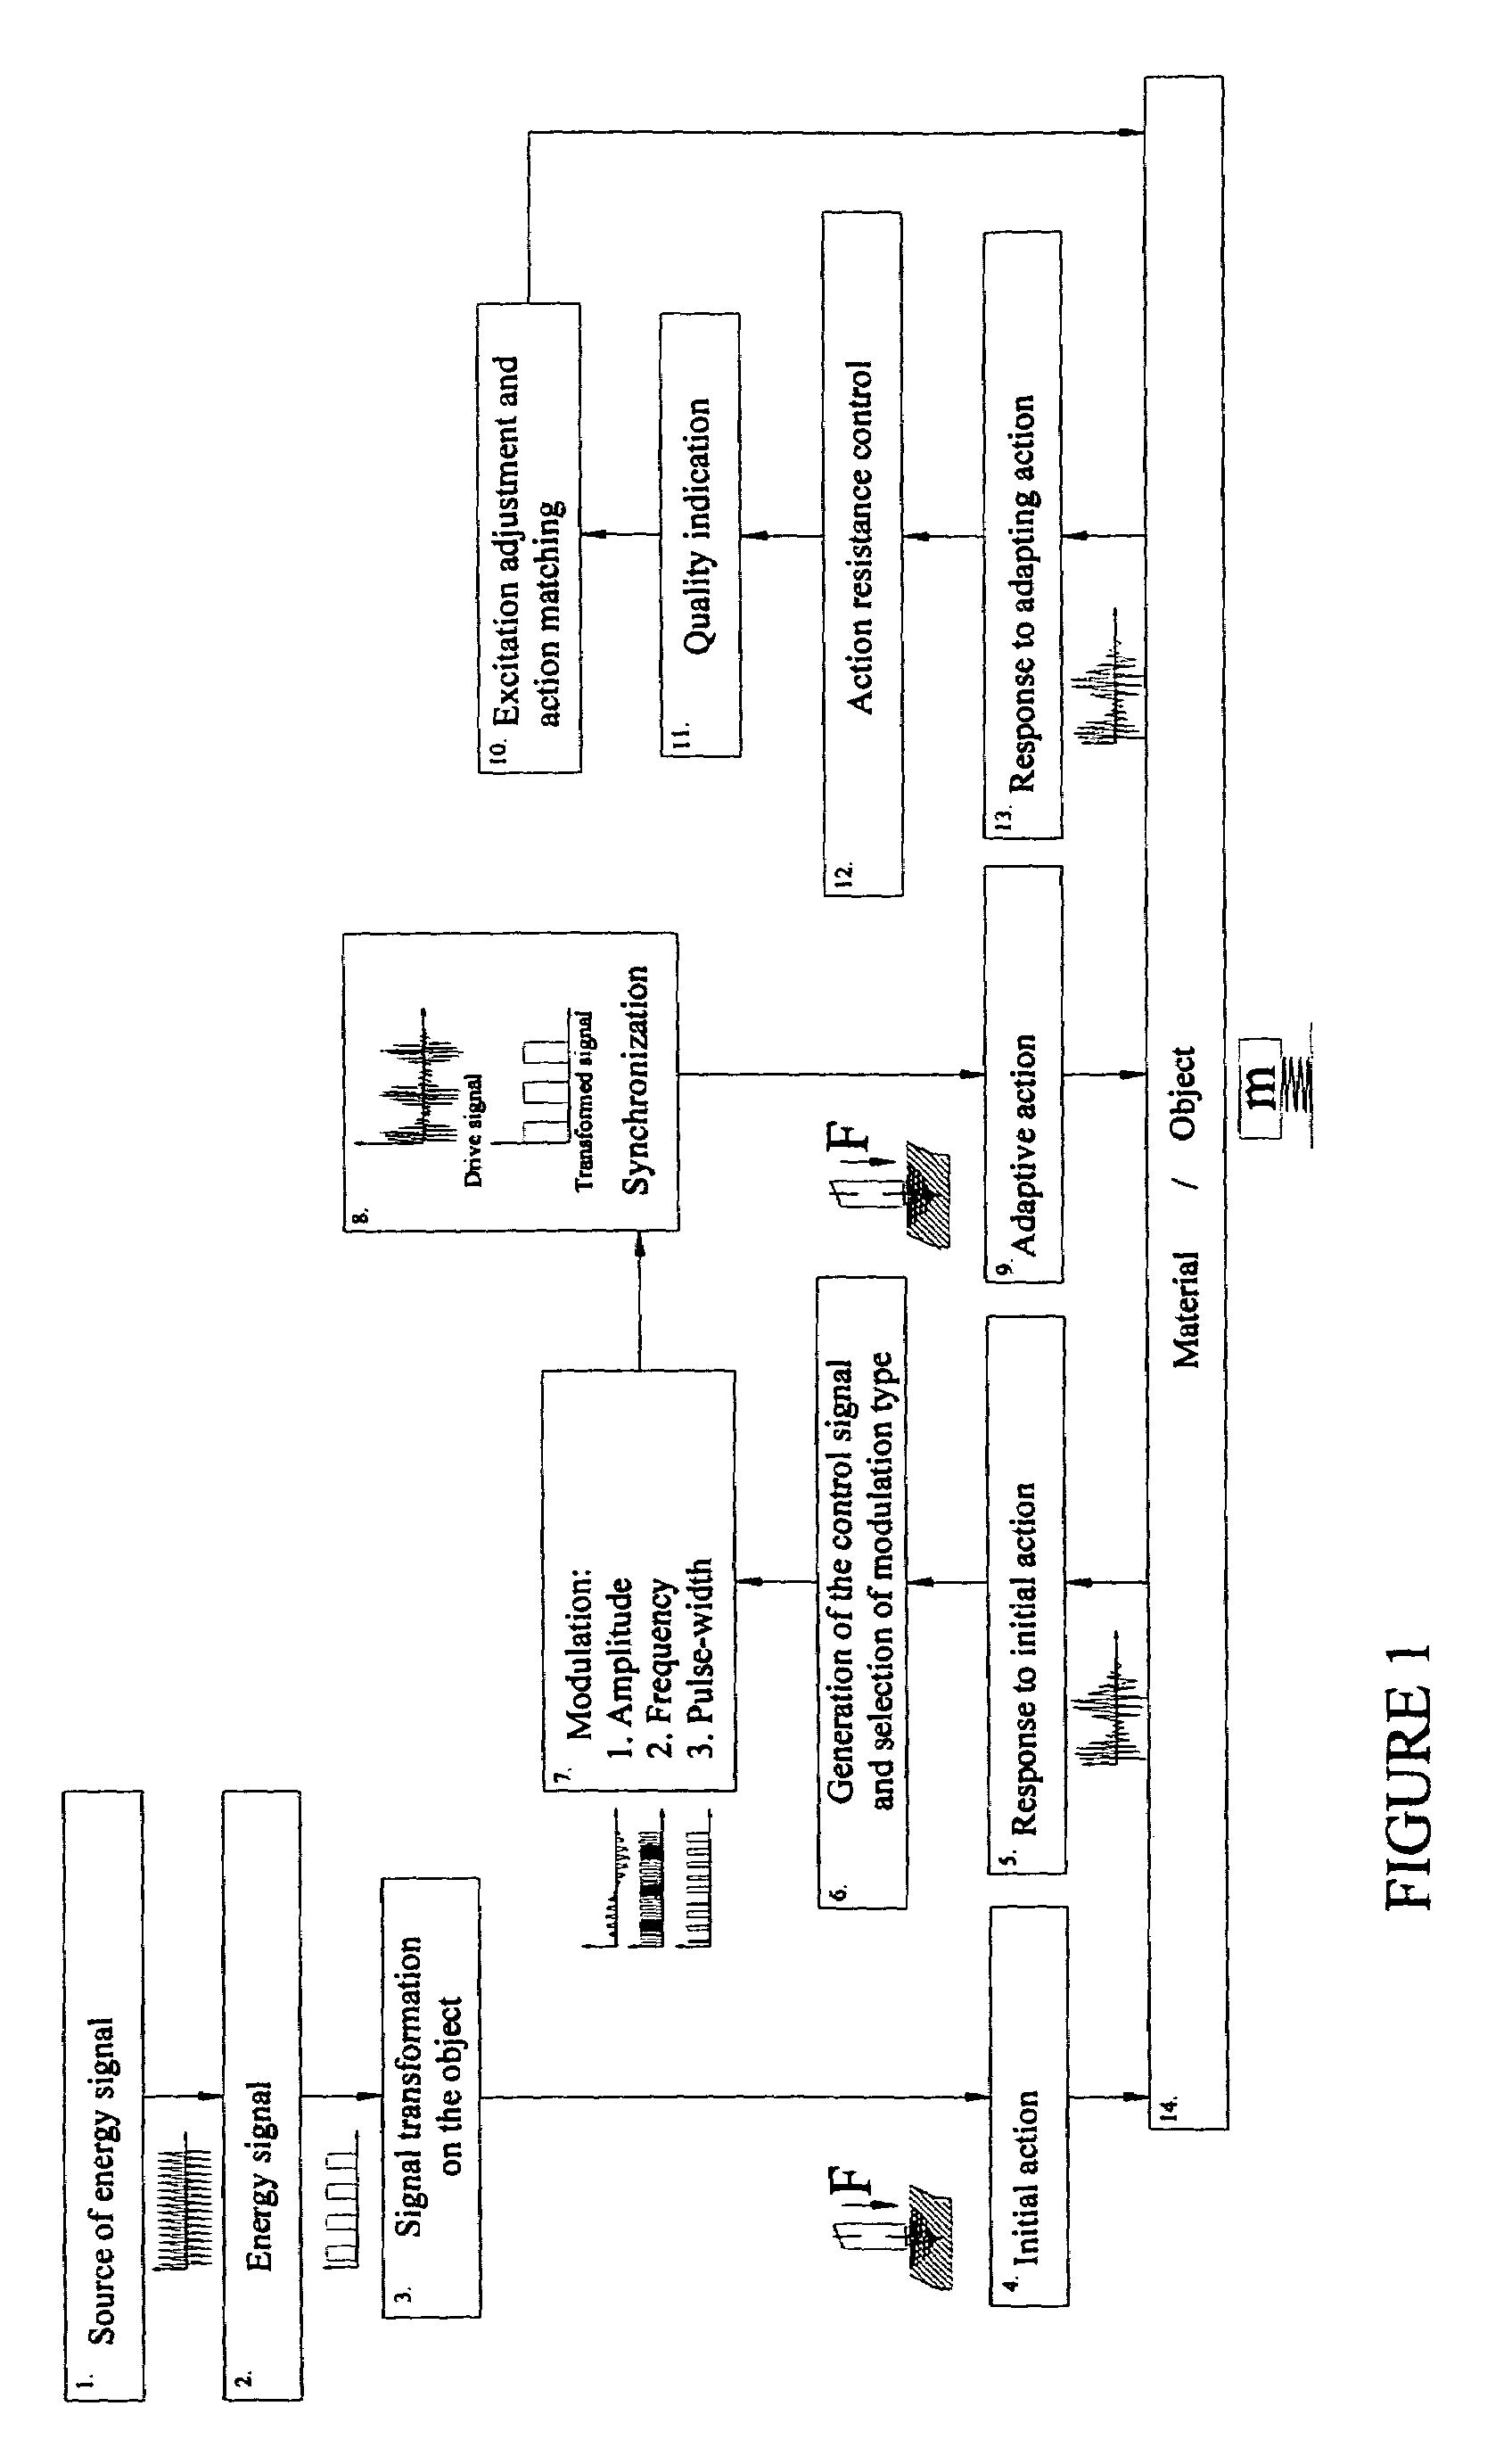 Method for modifying or producing materials and joints with specific properties by generating and applying adaptive impulses a normalizing energy thereof and pauses therebetween